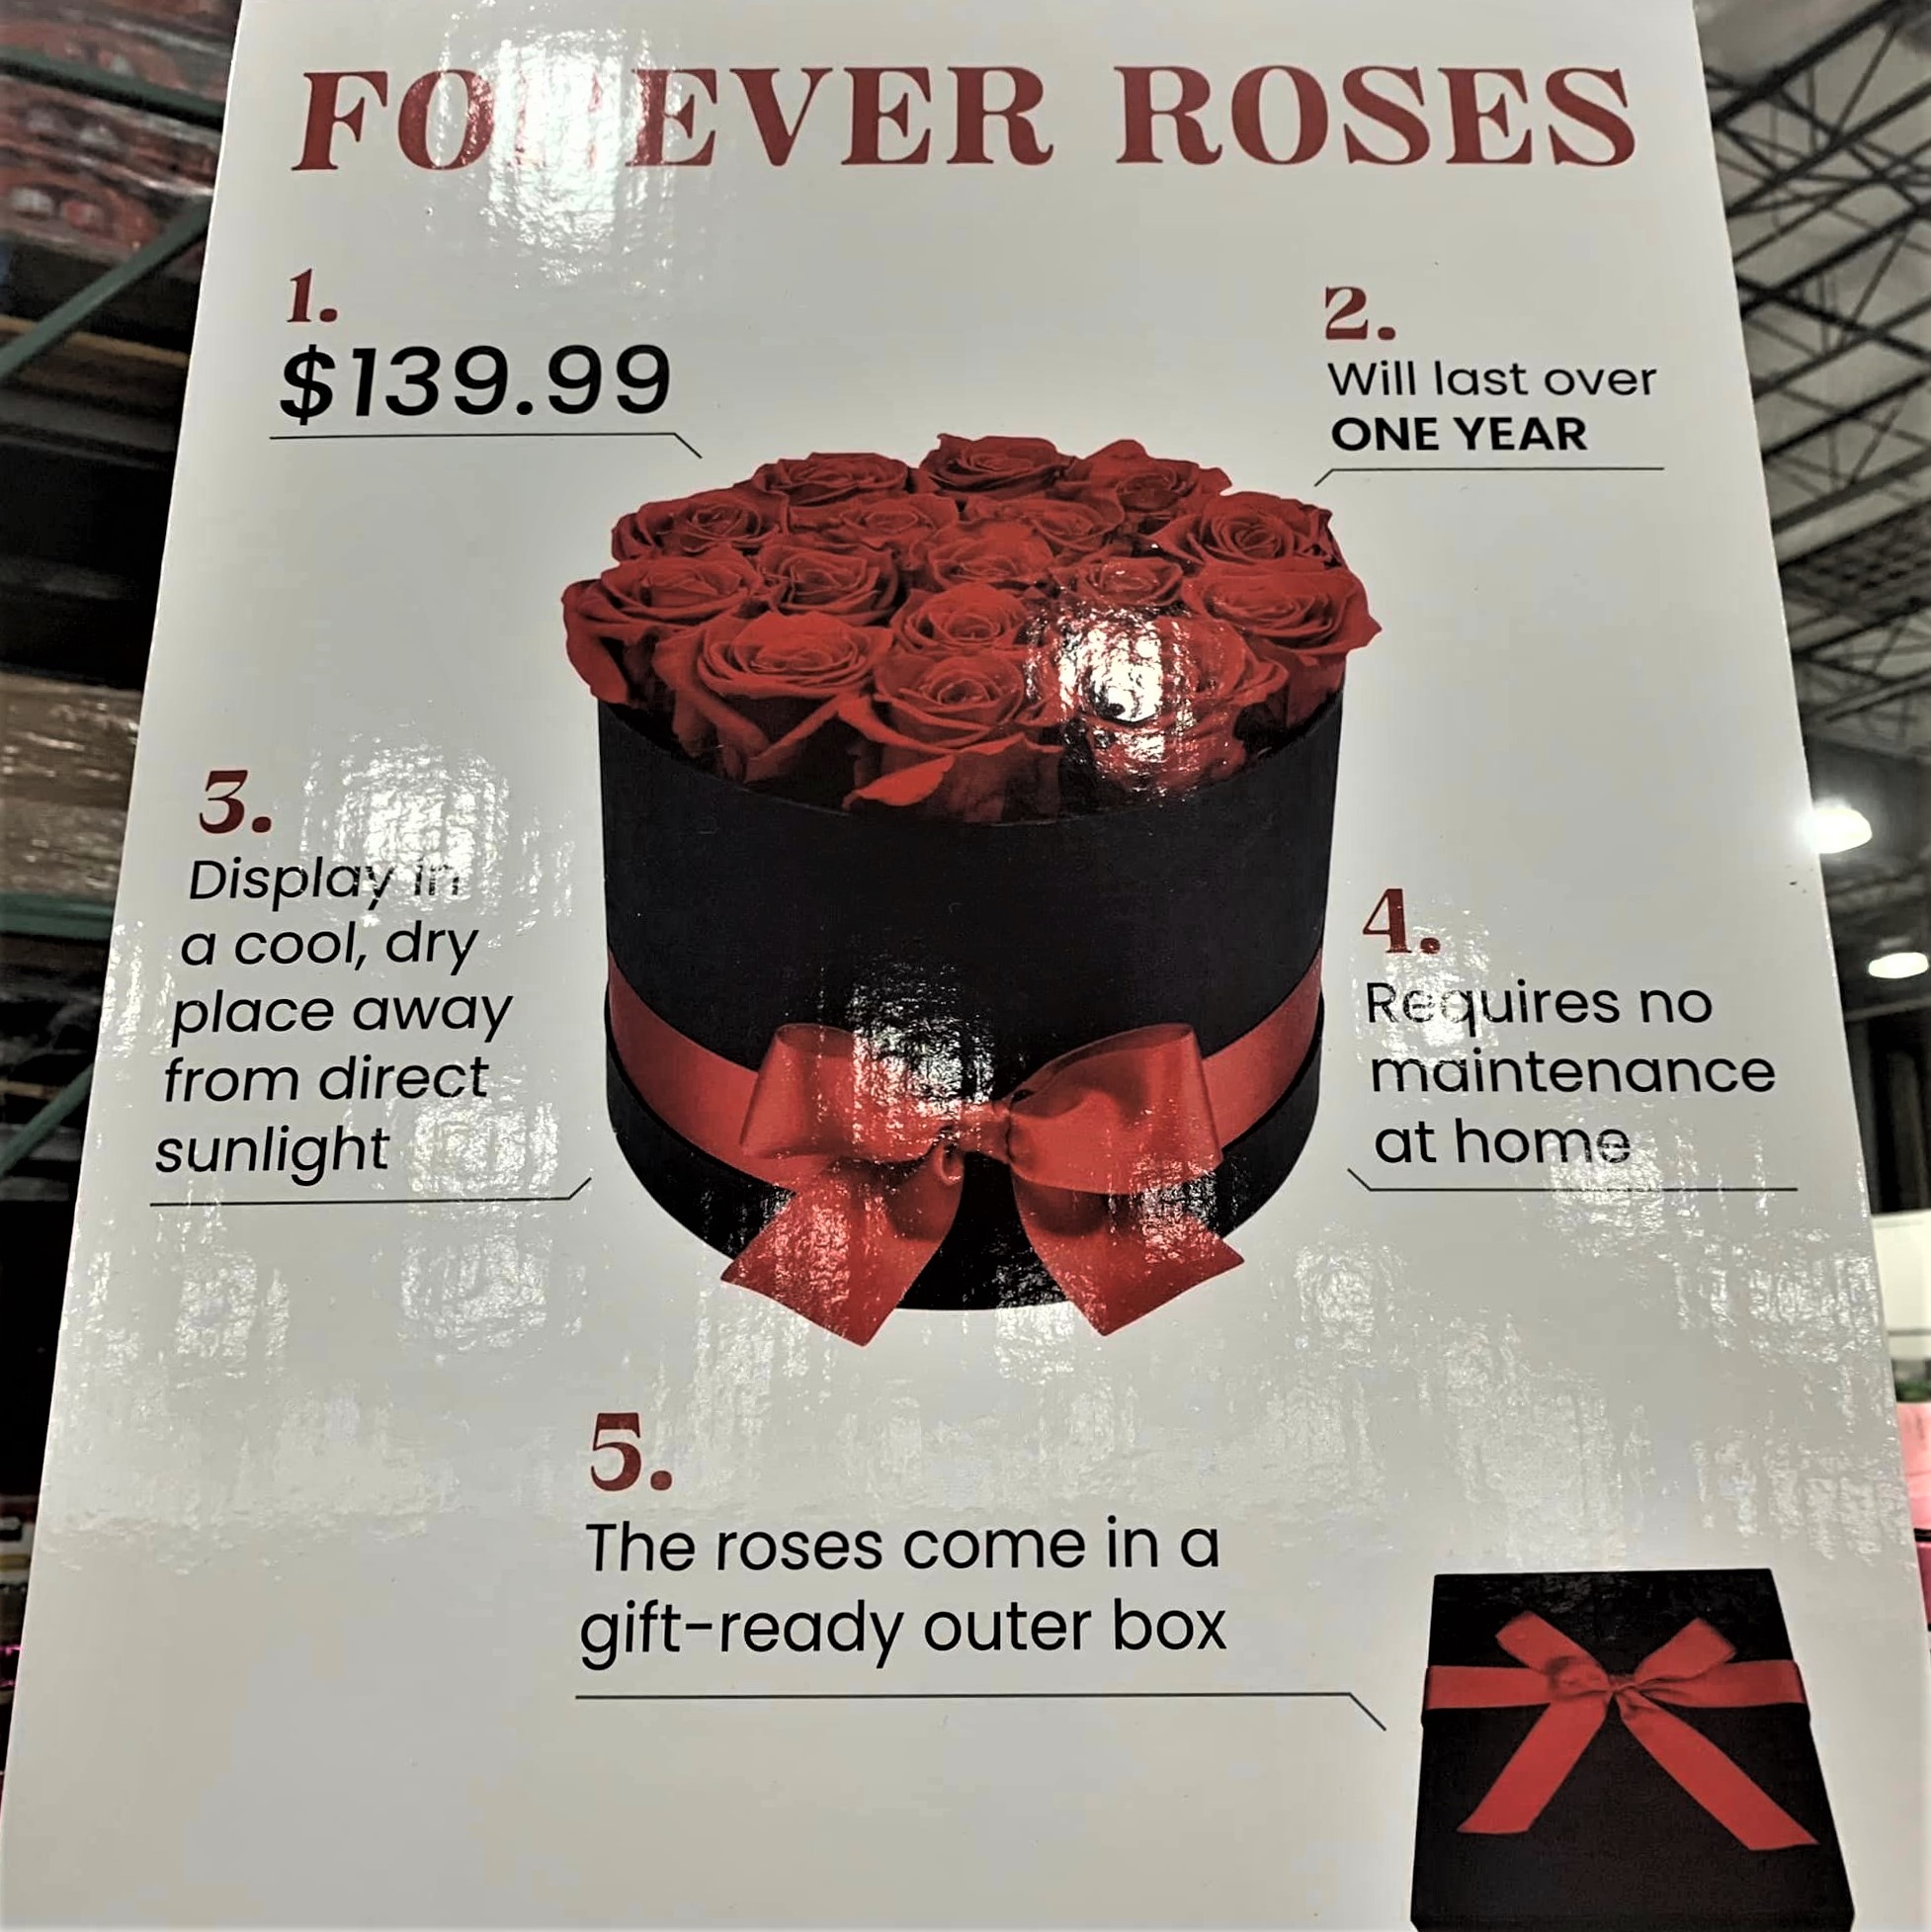 For a mere $140, you can buy a gift pack of roses that are said to last for over one year